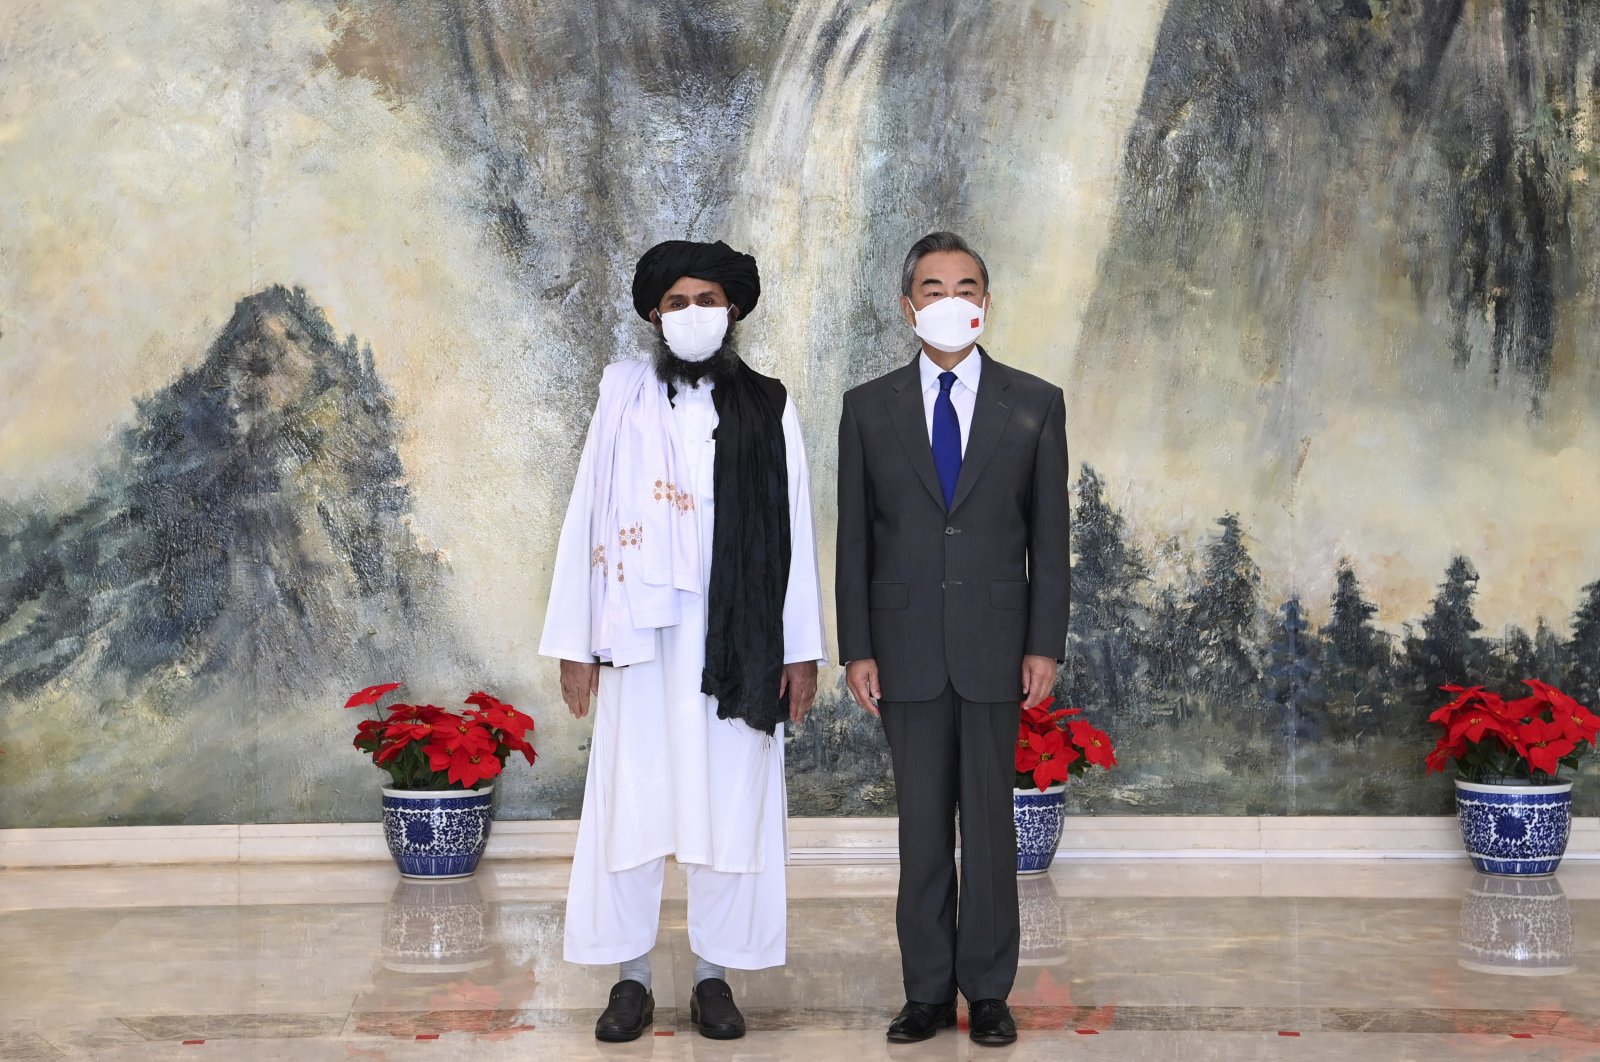 In this photo released by China's Xinhua News Agency, Taliban co-founder Mullah Abdul Ghani Baradar (L) and Chinese Foreign Minister Wang Yi pose for a photo during their meeting in Tianjin, China, July 28, 2021. (Li Ran / Xinhua via AP File Photo)